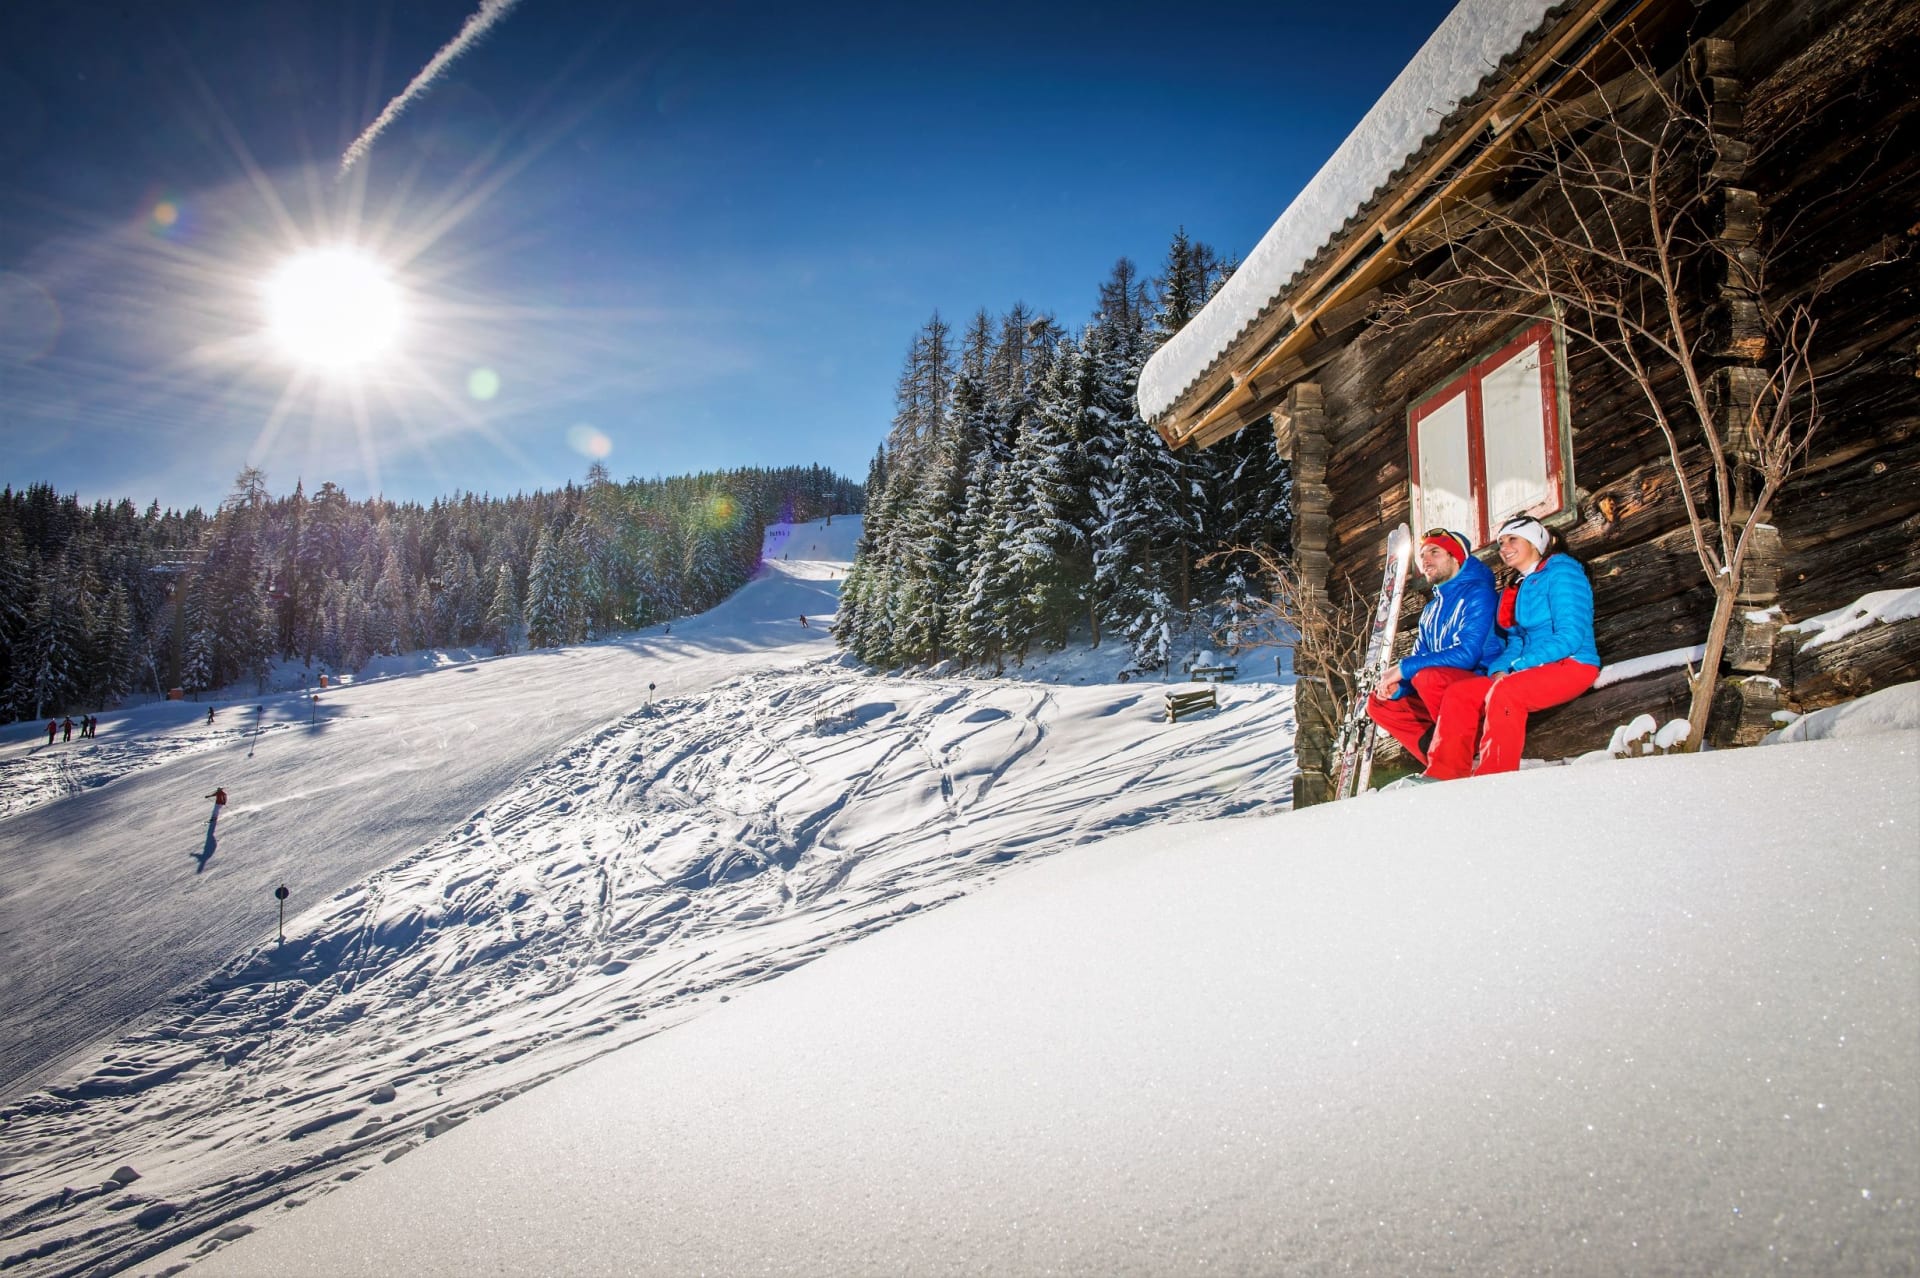 Short holiday with 3-day ski-pass for Ski Amade